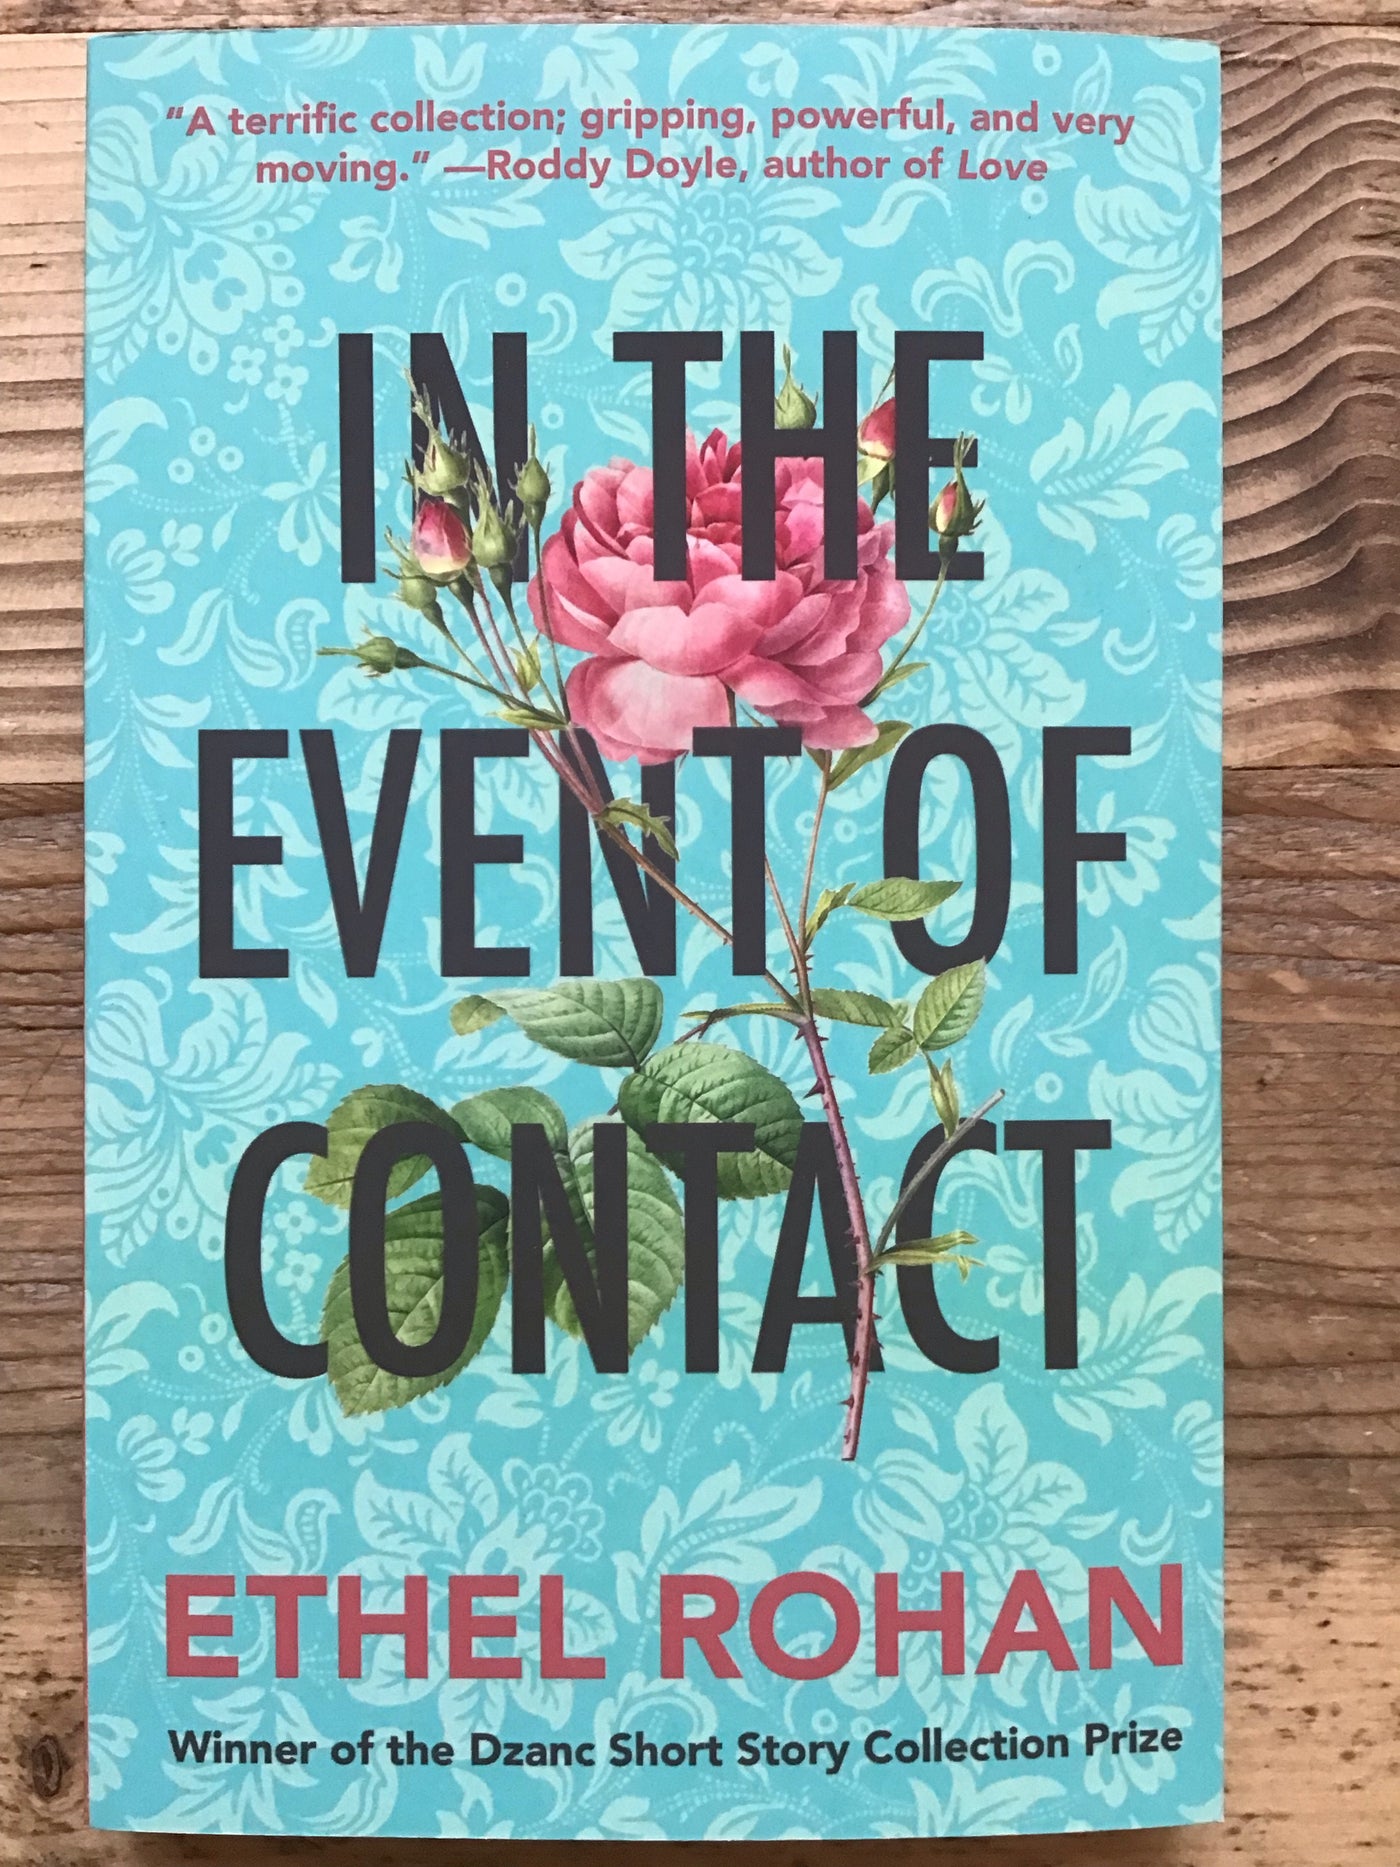 In The Event of Contact: Stories